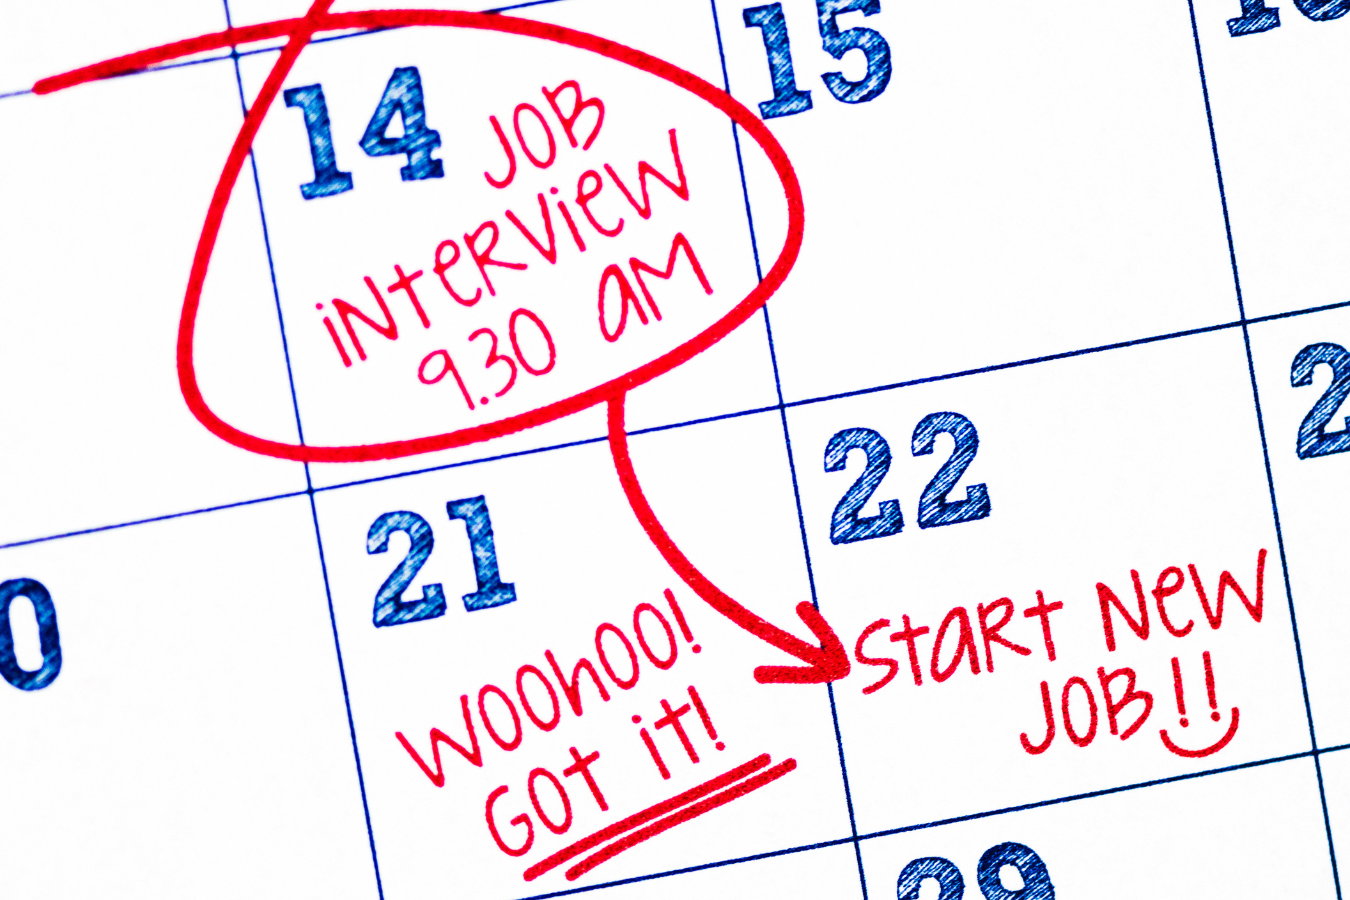 Calendar showing a job interview scheduled: these tips will help with your next marketing job interview.